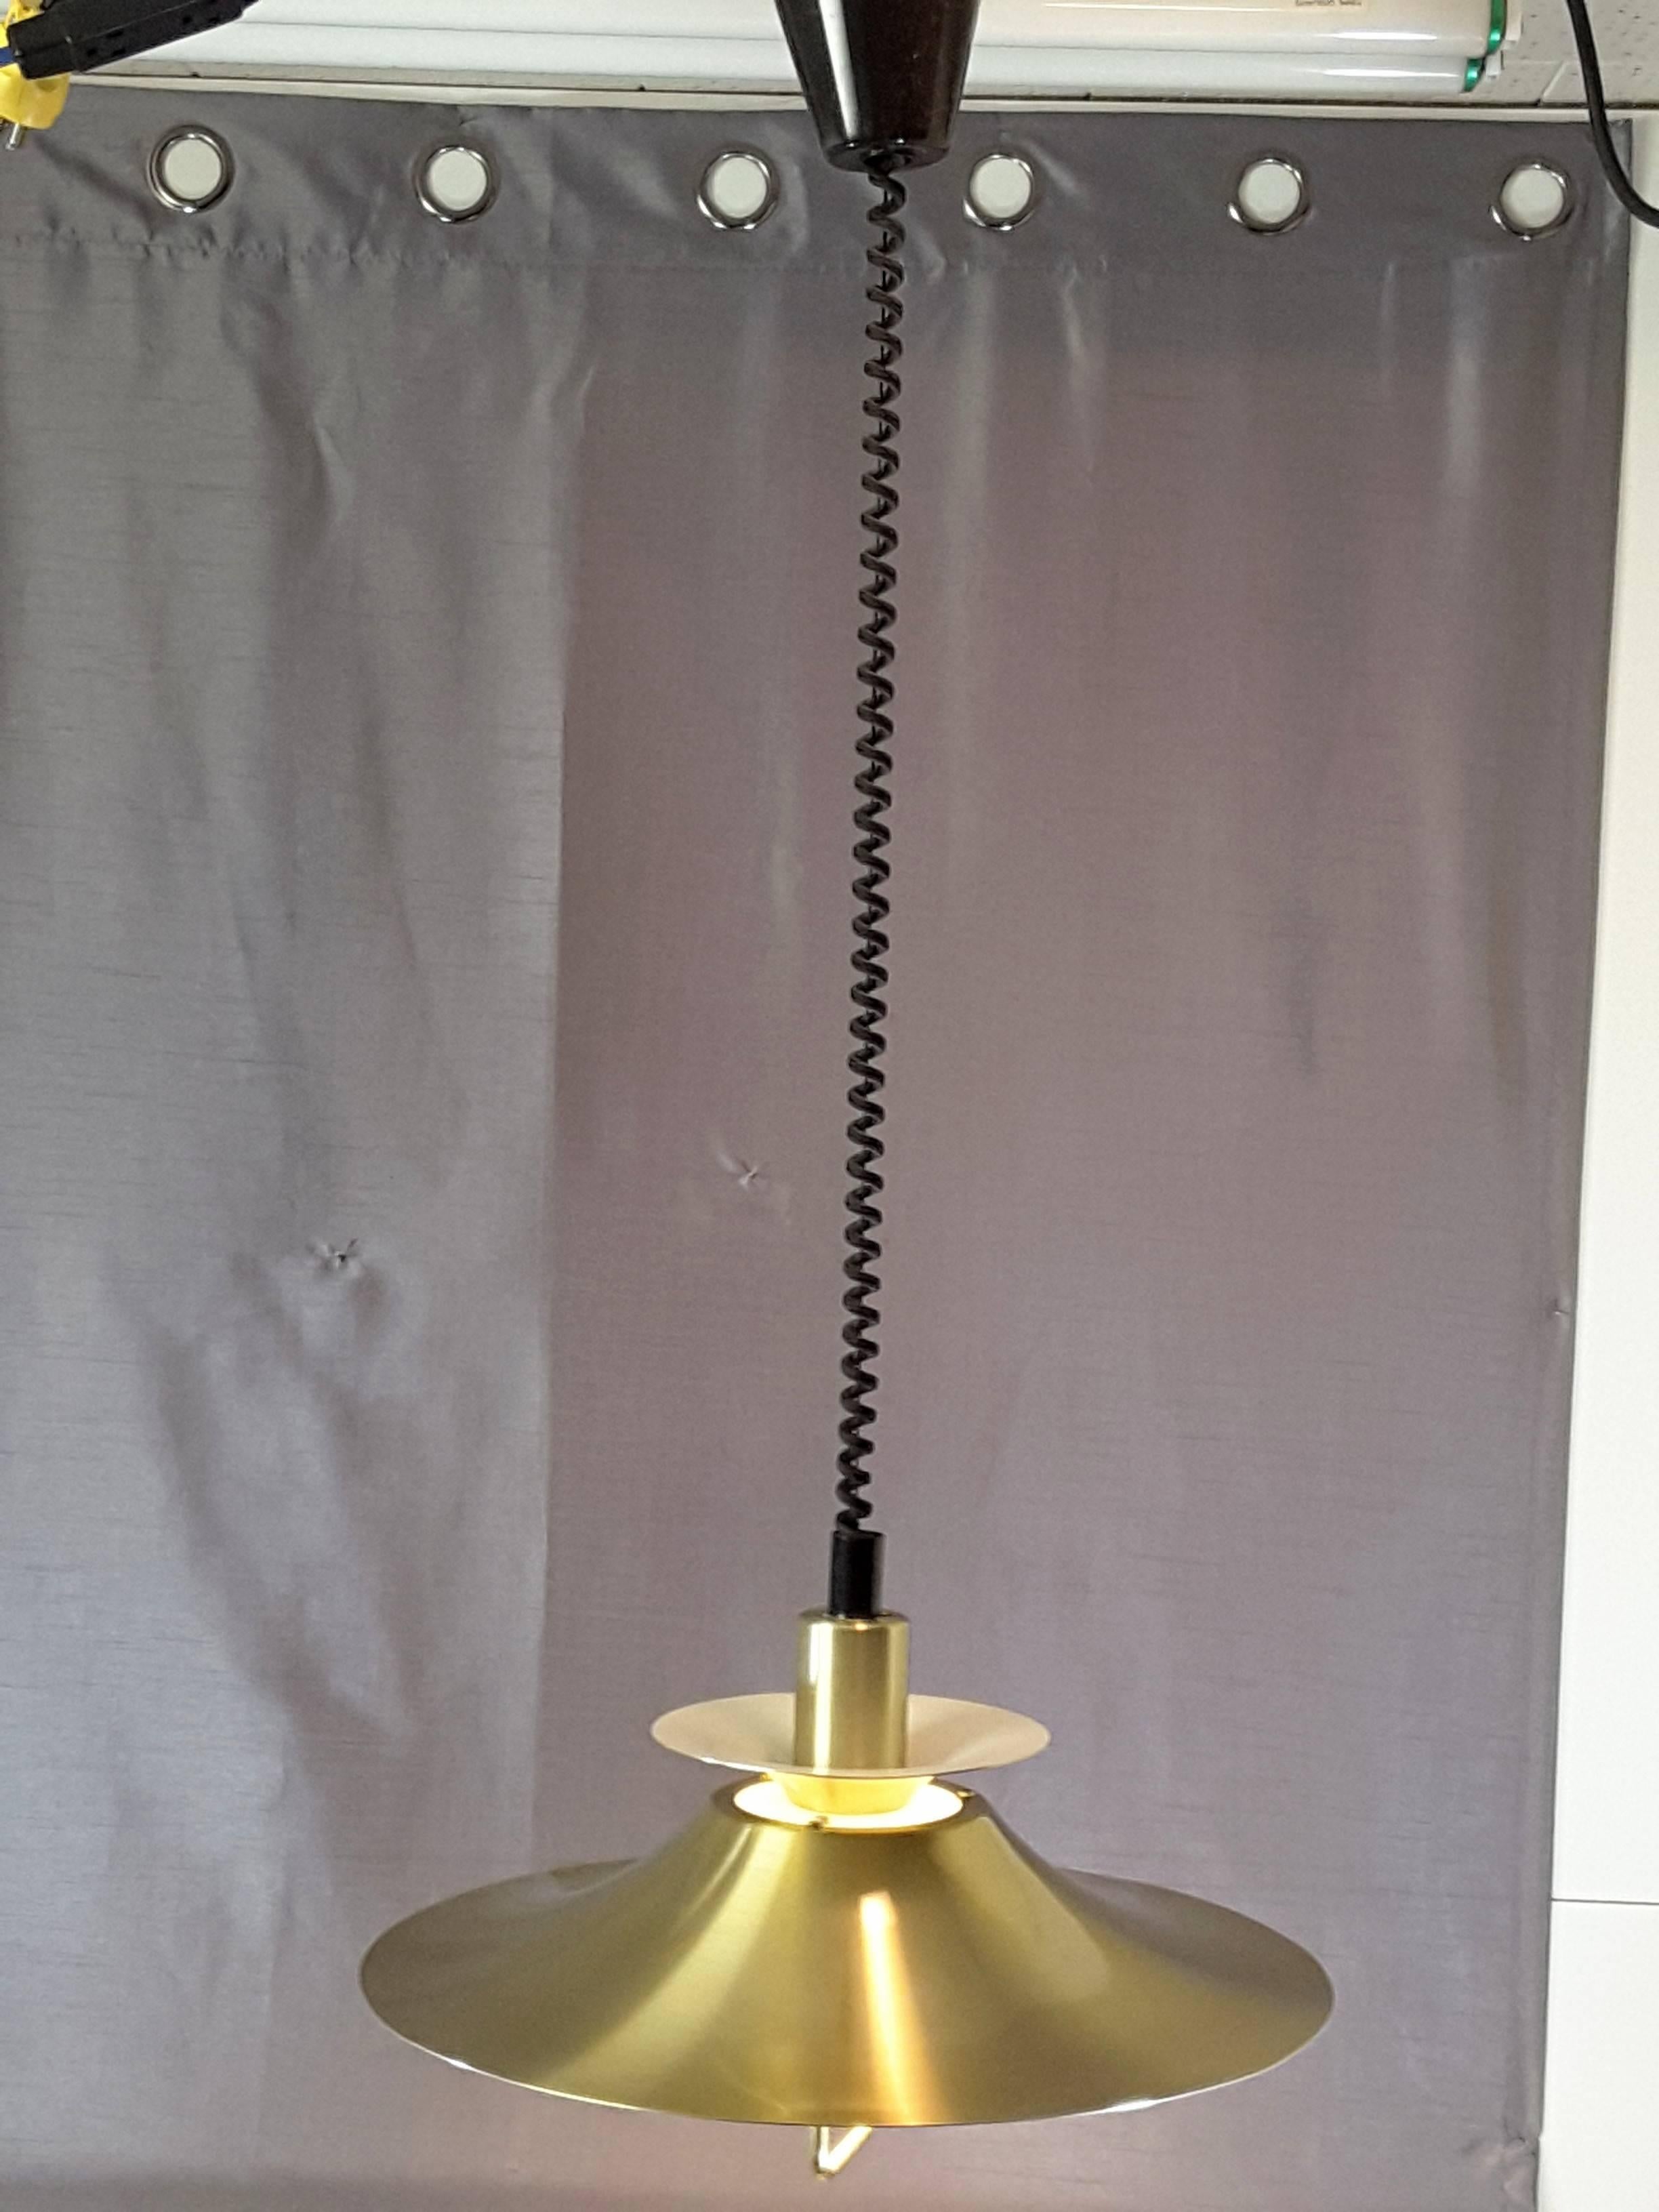 Frandsen retractable brass pendant, made in Denmark. The pendant is brass exterior, white interior, four ring, with a bottom pull-down brass handle. The fixture has a coiled wire, and easily retracts up and down. The fixture hangs 28